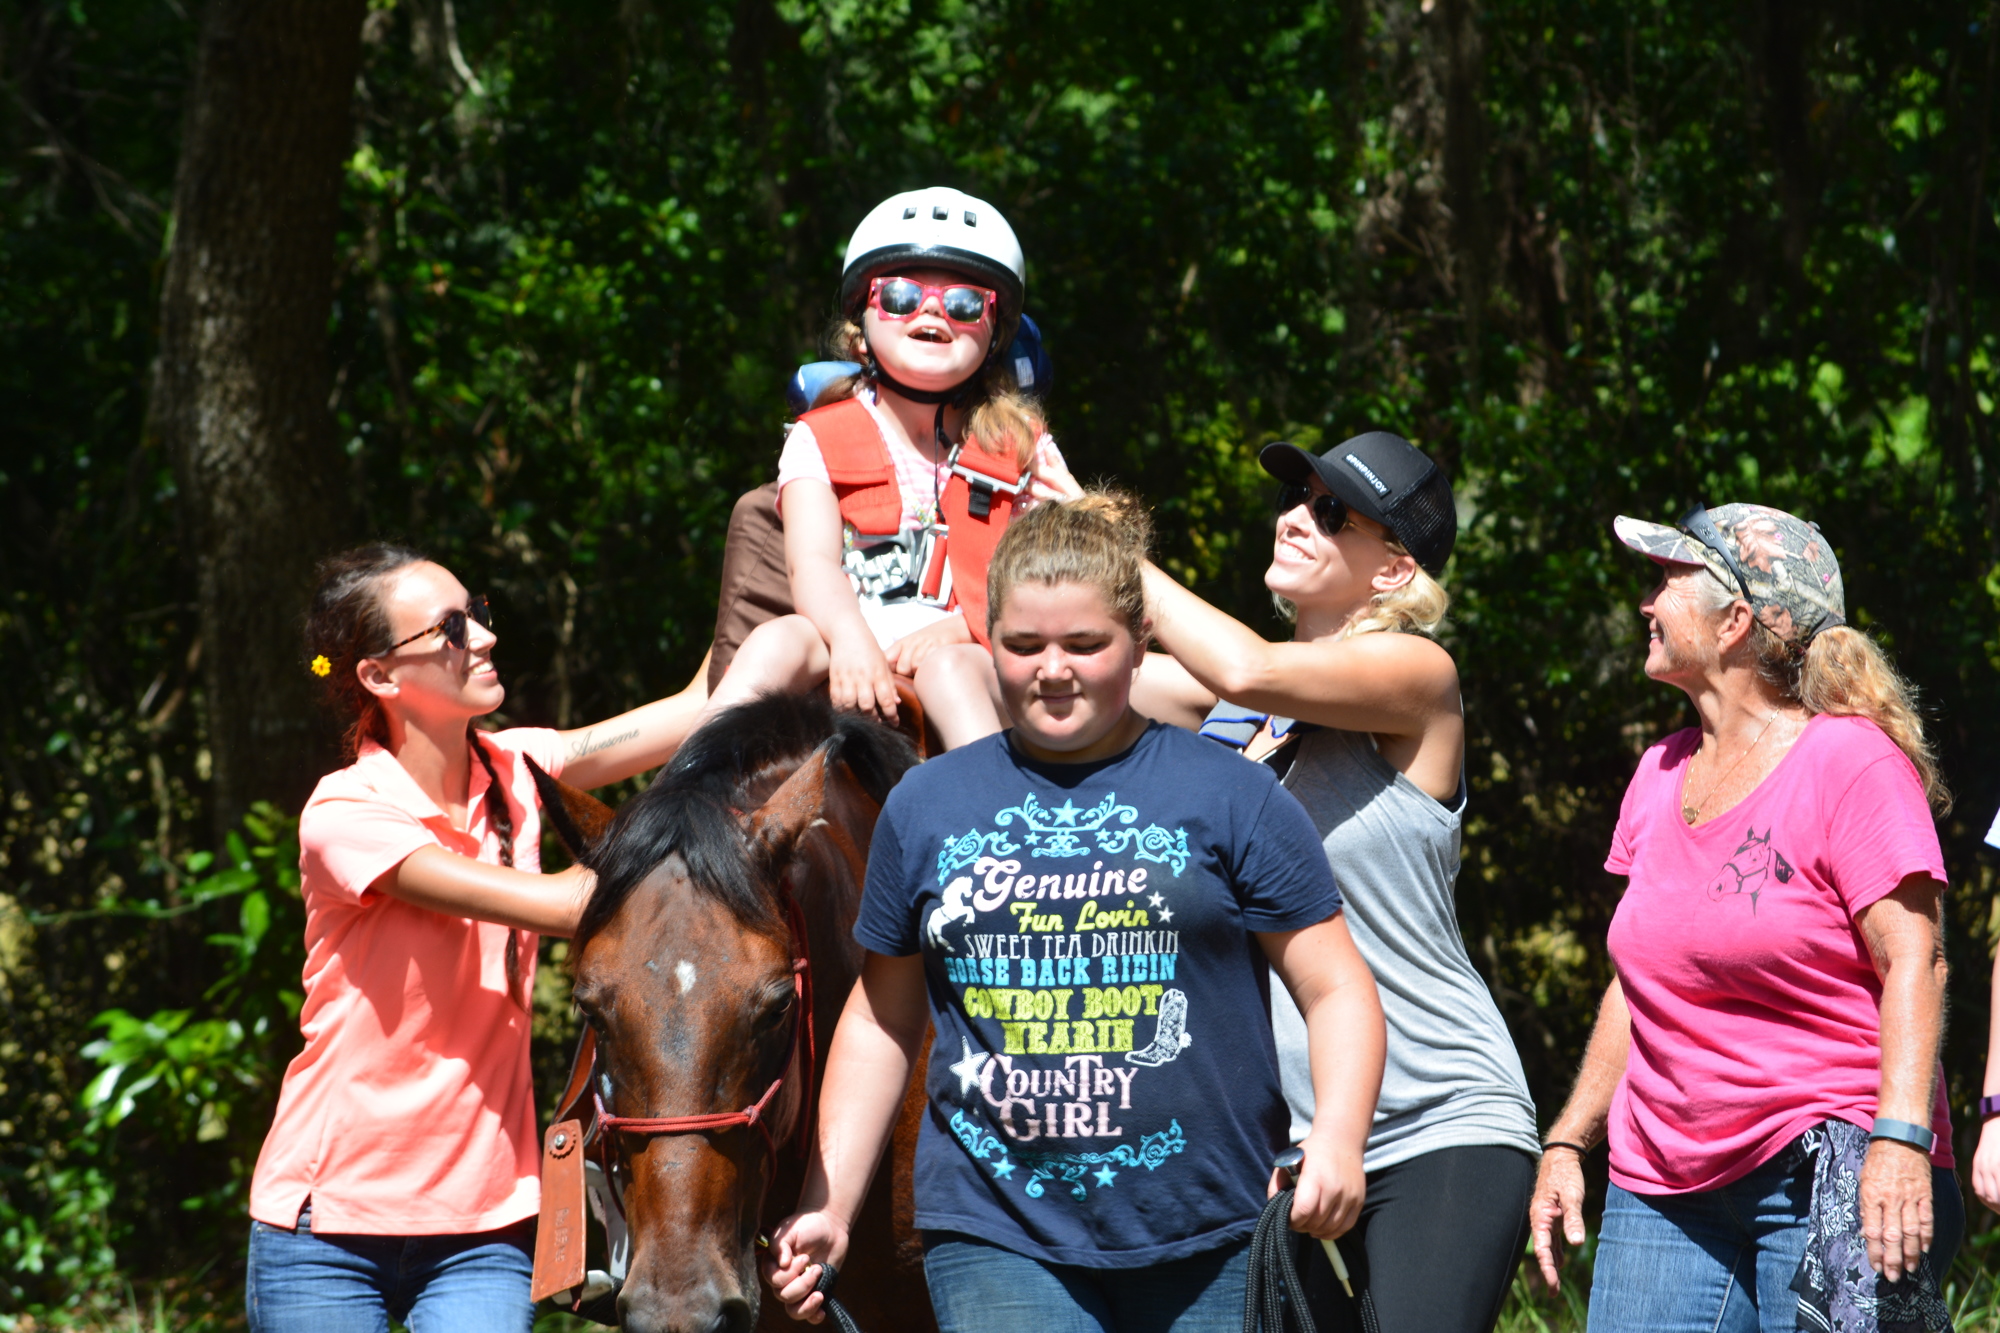 Taylor Holweger rides a horse for the first time with the support of Regina Holder, Maddy Hartwig, Jeana Miller and Kathy Wolfe.